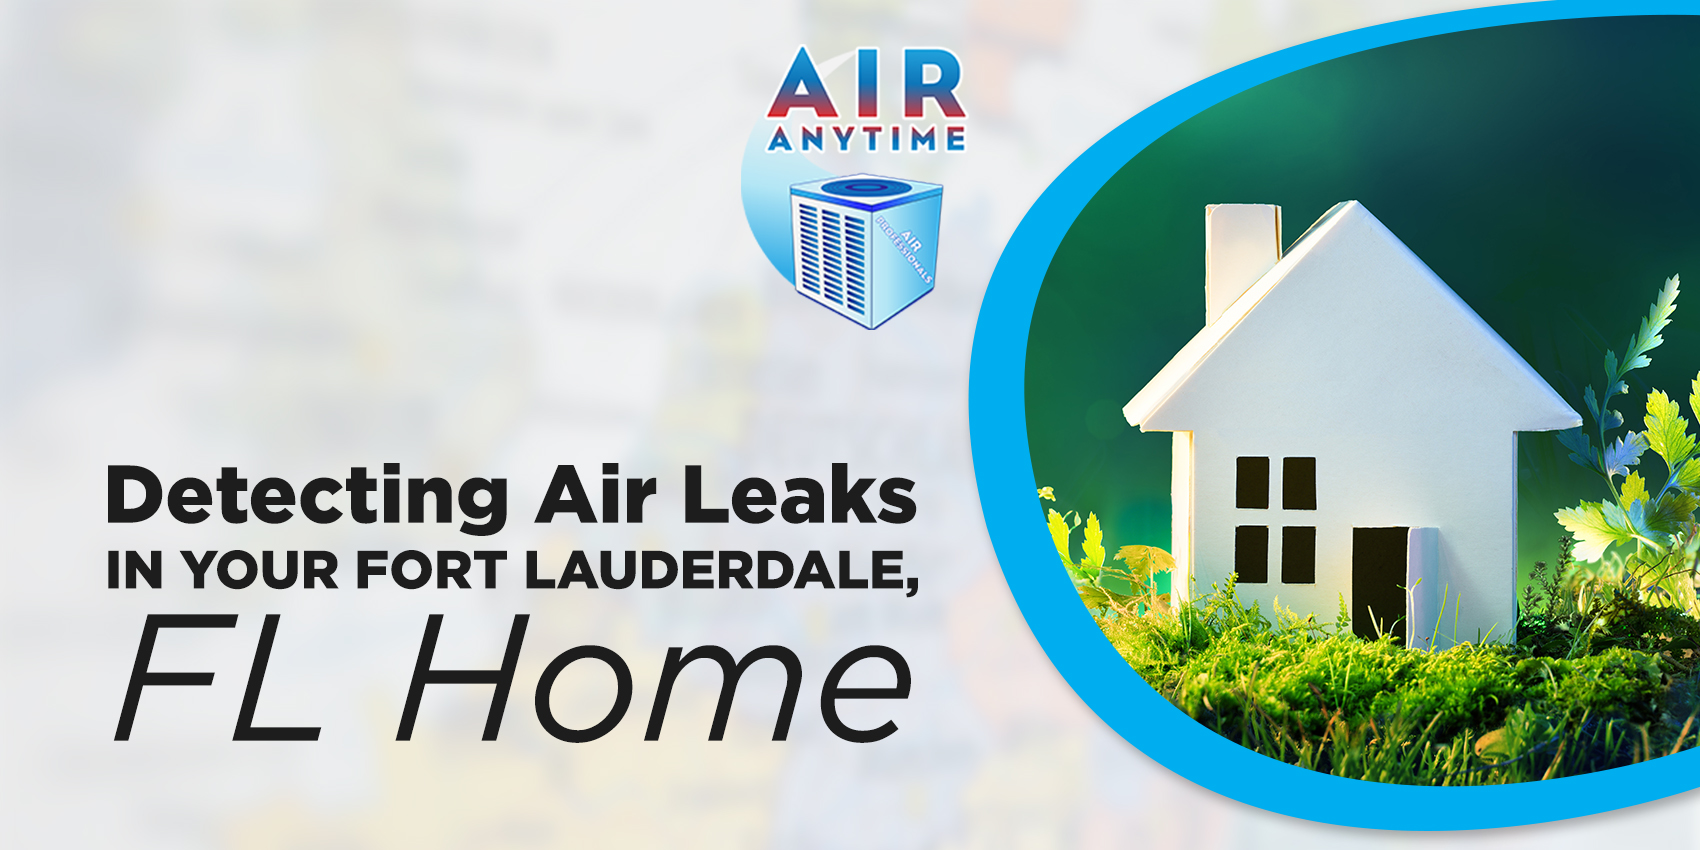 Detecting Air Leaks in your Fort Lauderdale, FL Home